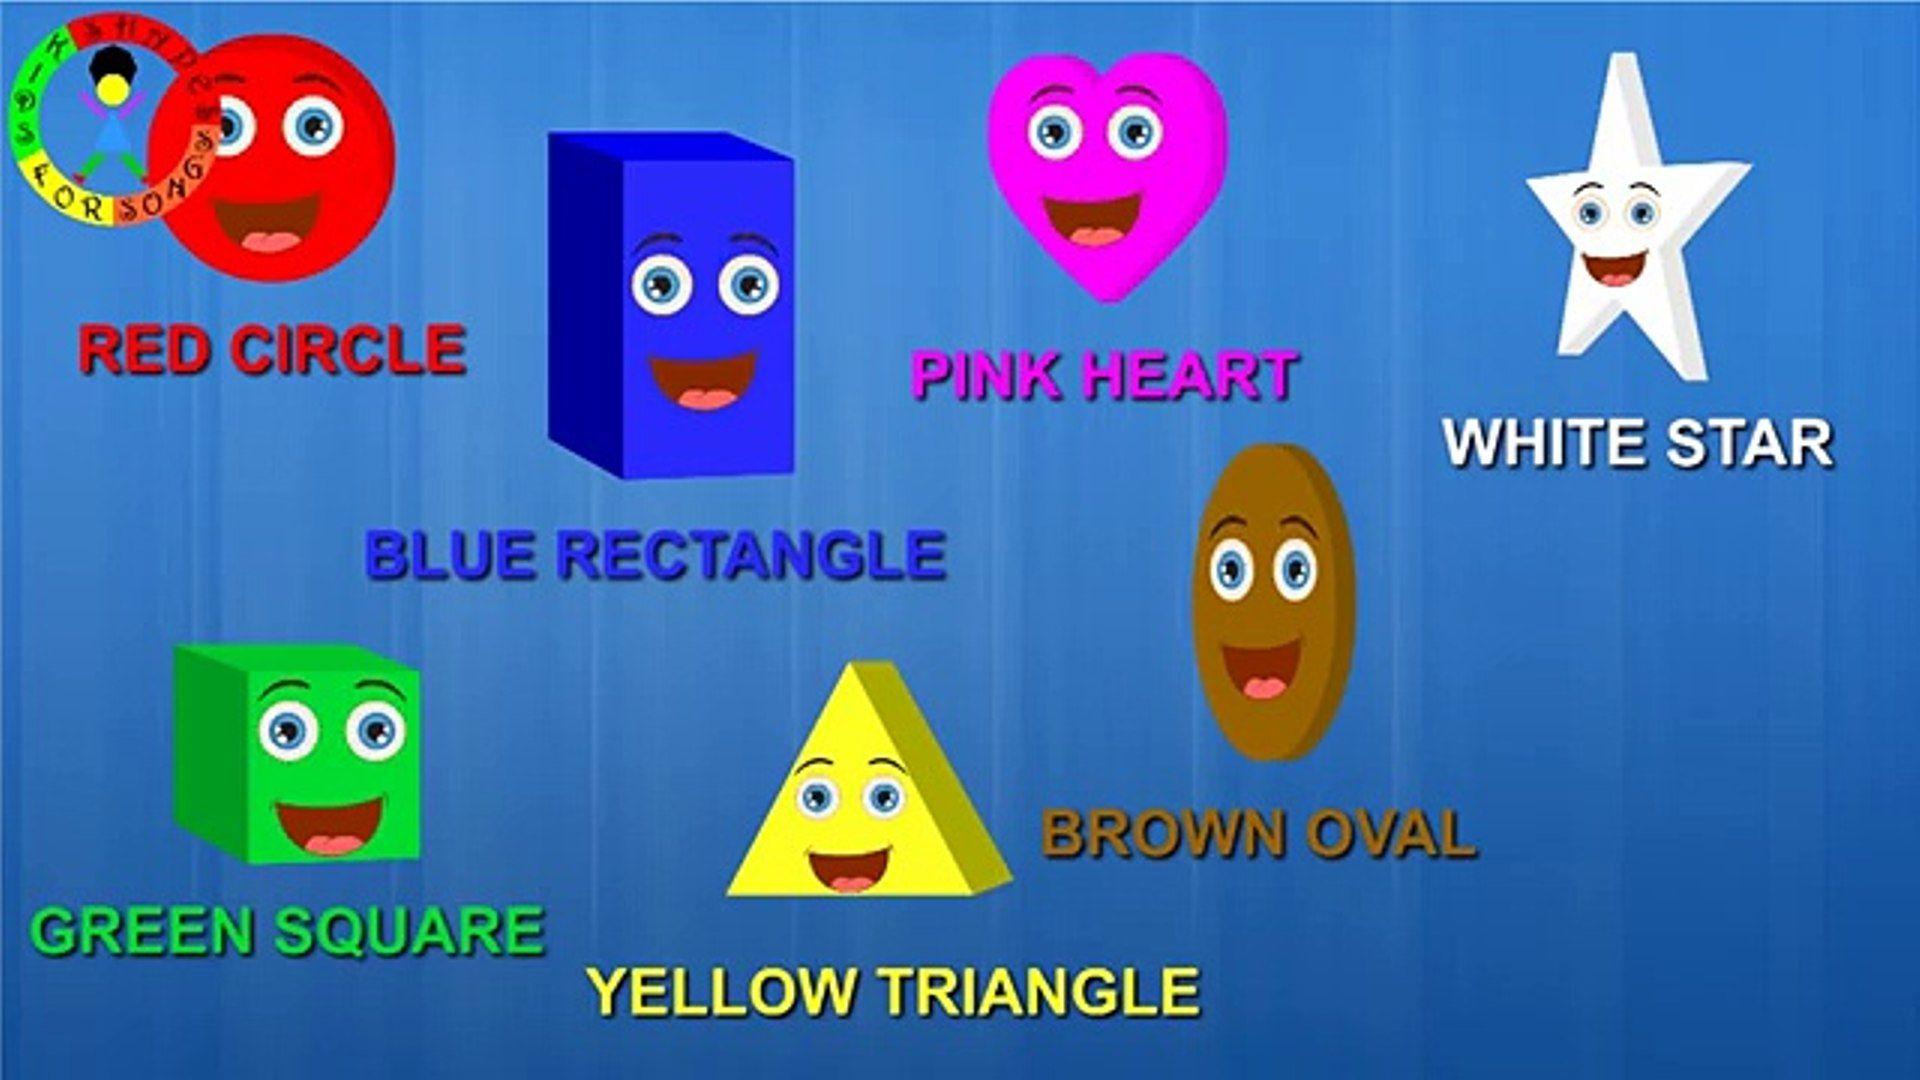 Blue Square Yellow Oval Logo - Shapes Colors Song | The Shapes Song | Learn Shapes And Colors Song ...